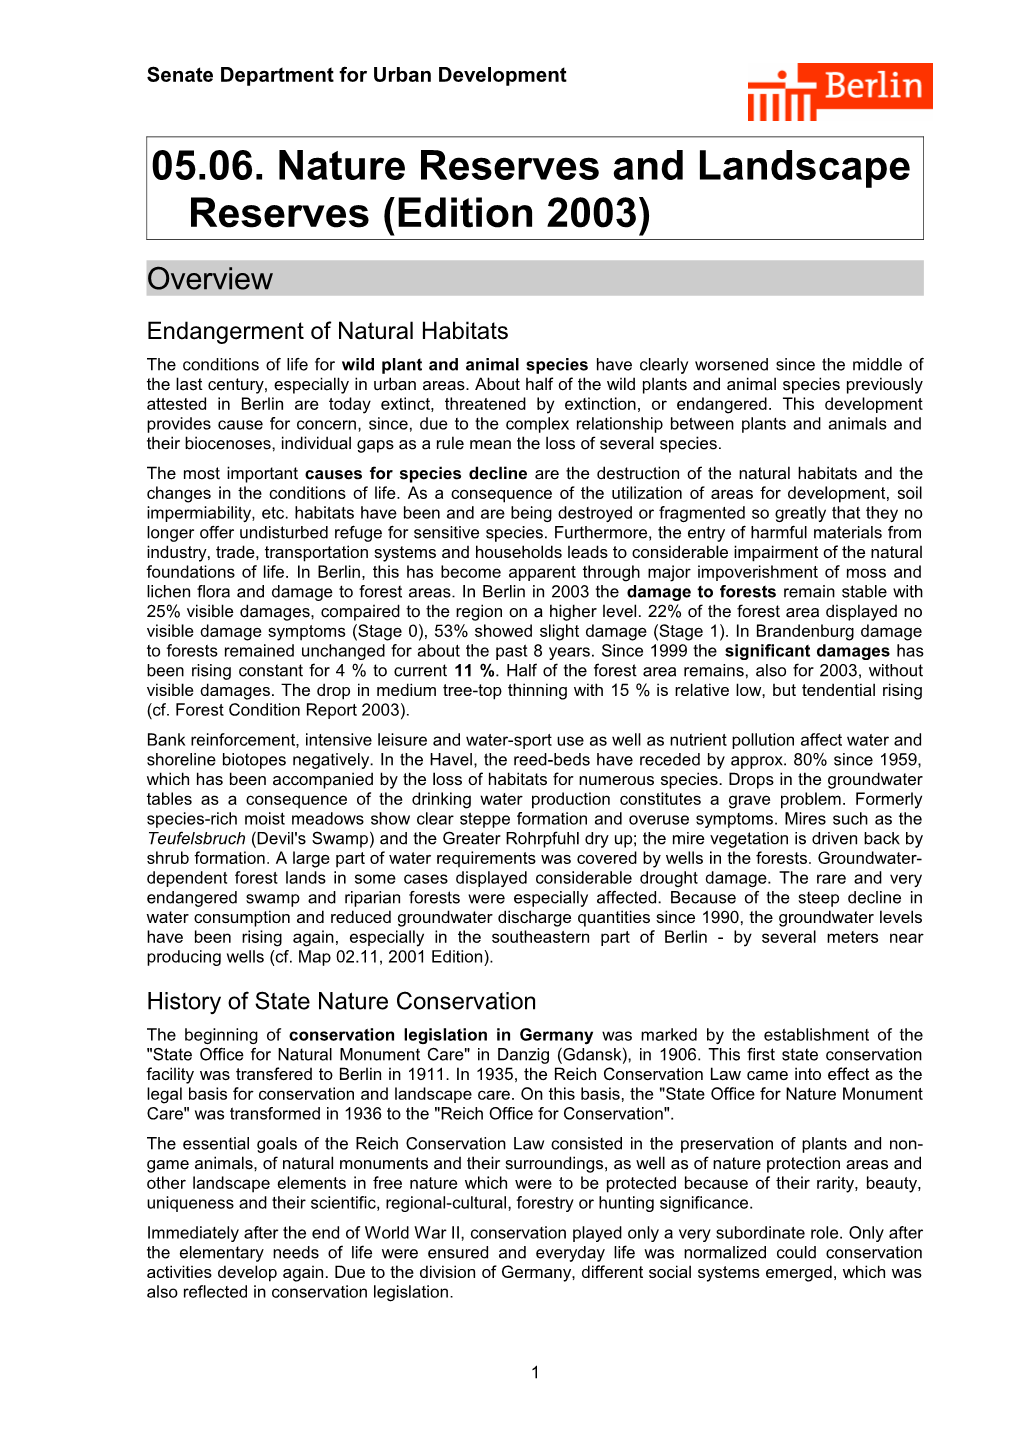 05.06. Nature Reserves and Landscape Reserves (Edition 2003)